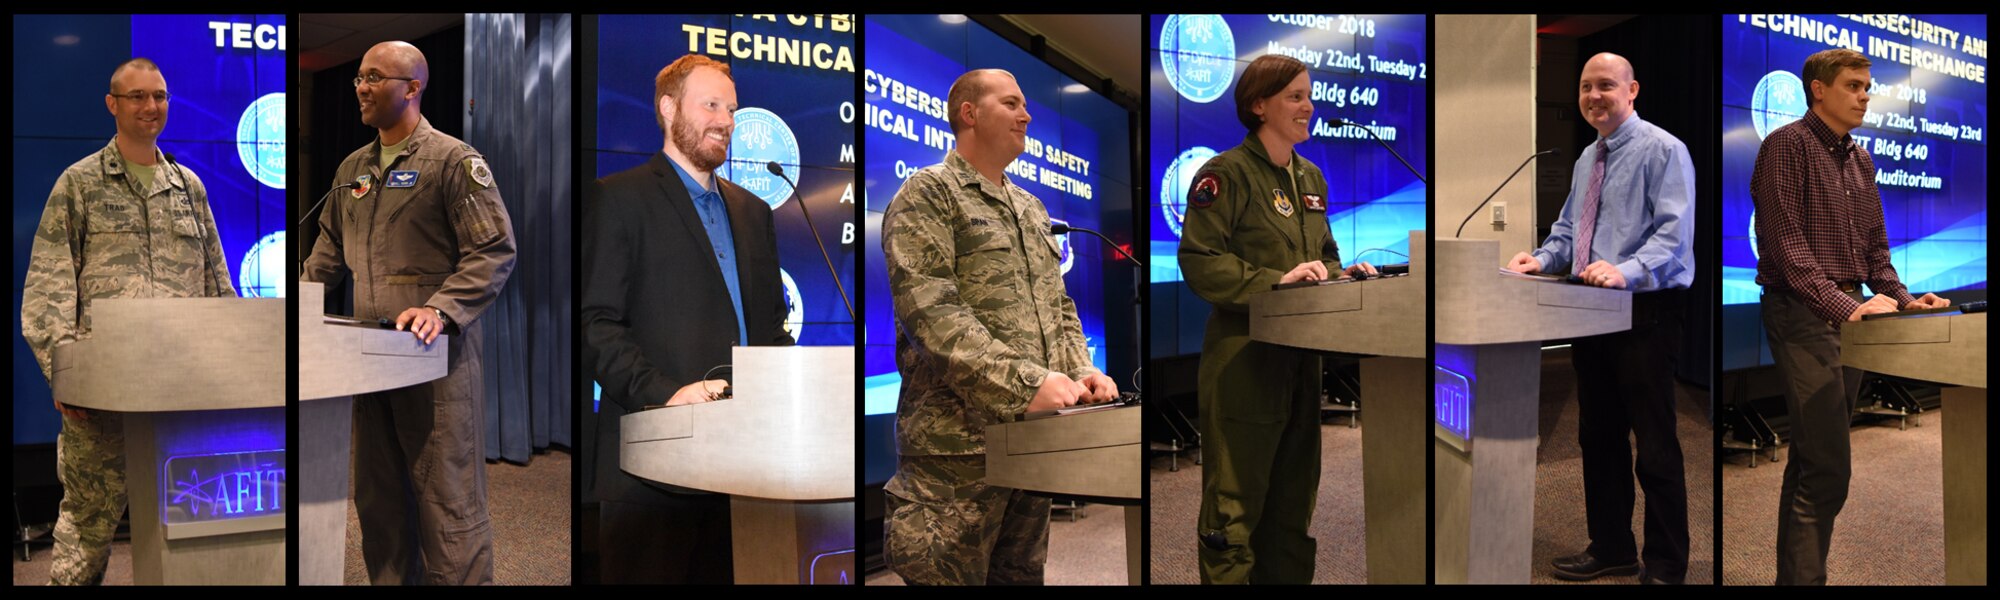 The Air Force Institute of Technology (AFIT) School of Systems and Logistics hosted the first ever System Theoretic Process Analysis (STPA) Cybersecurity and Safety Technical Interchange Meeting (TIM) on 22-23 October 2018. The TIM identified how USAF Program Managers and Engineers can use STPA to manage complex acquisition problems. (U.S. Air Force photo by Mr. Michael Madero)